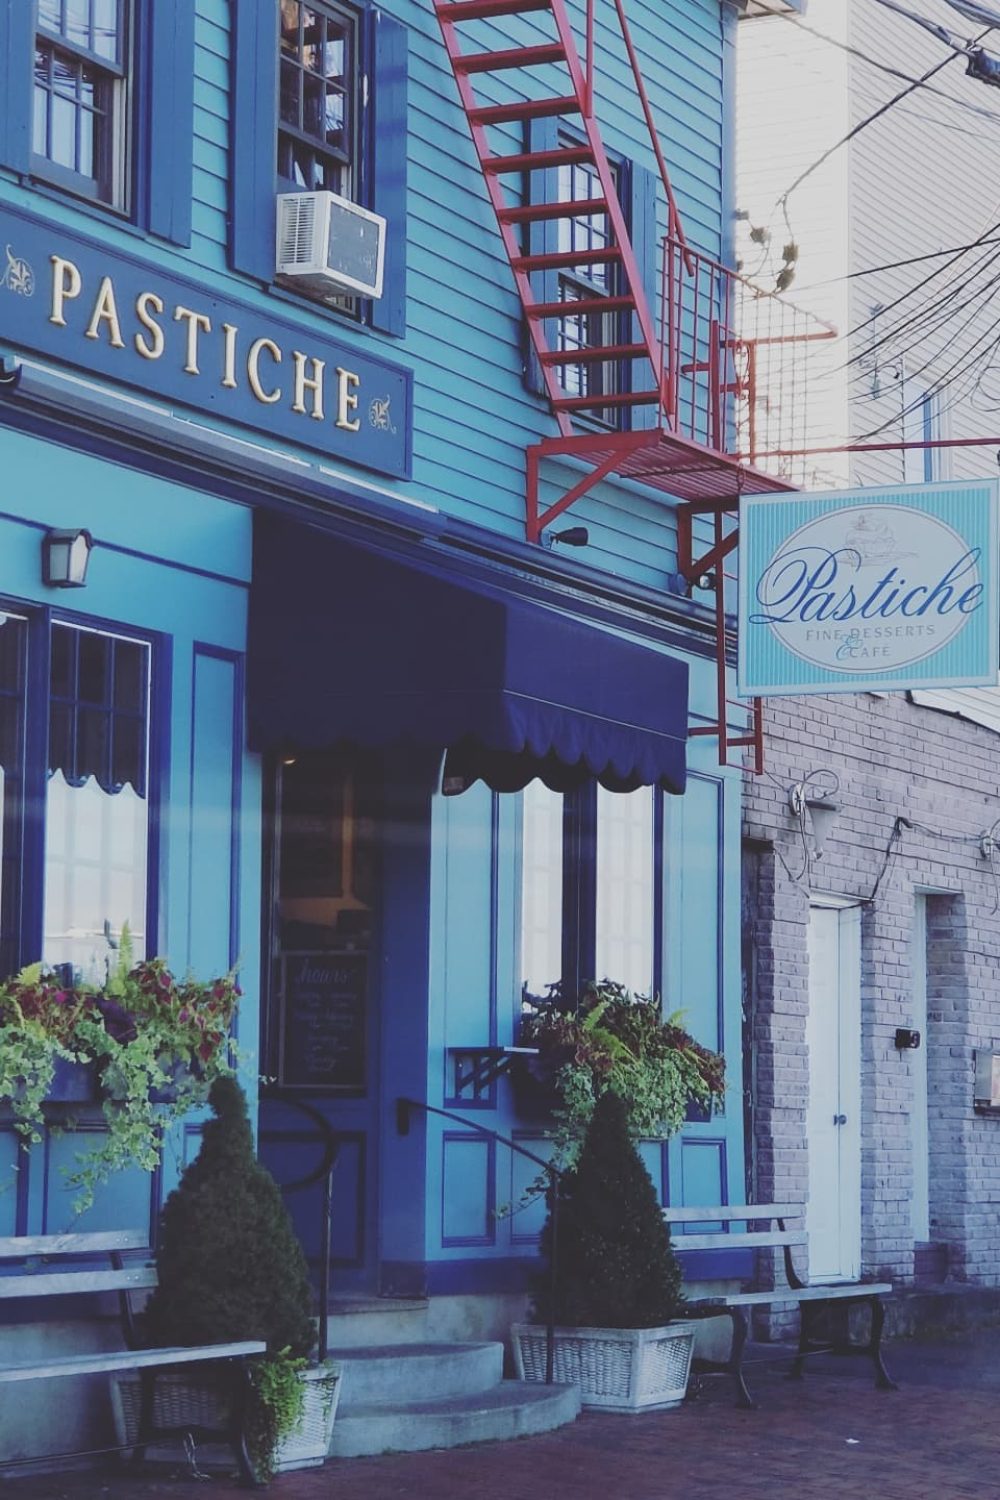 Pastiche bakery near DePasquale Square in Providence, Rhode Island